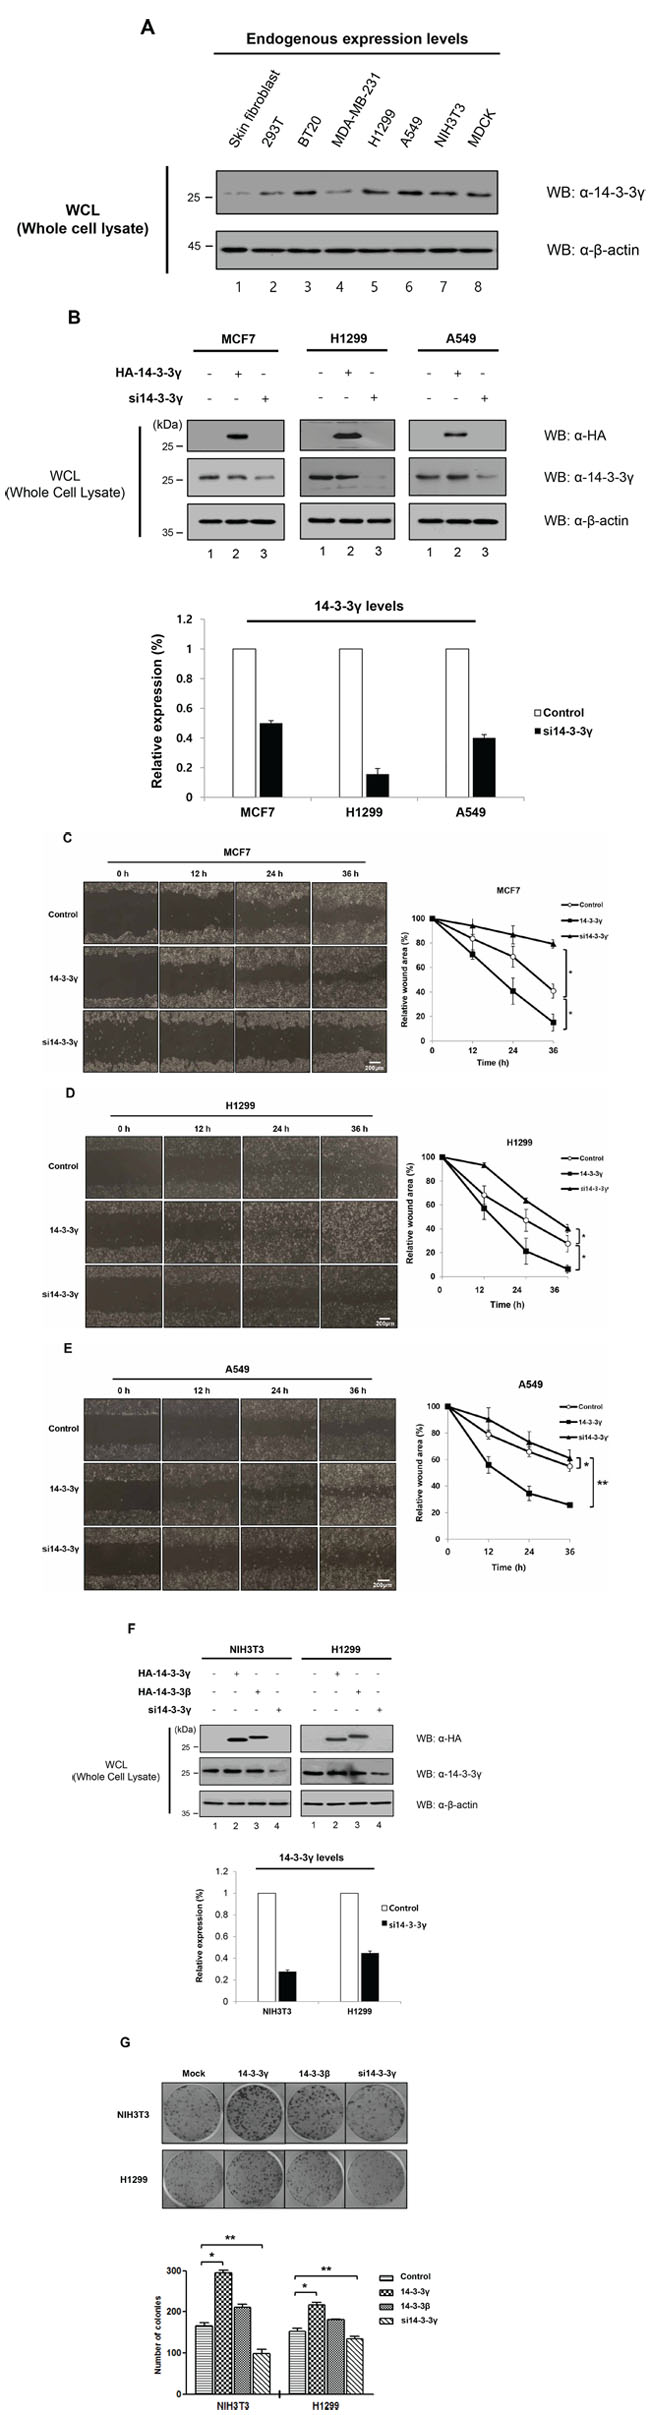 Promotion of cell proliferation by overexpression of 14-3-3&#x03B3; in cancer cells.